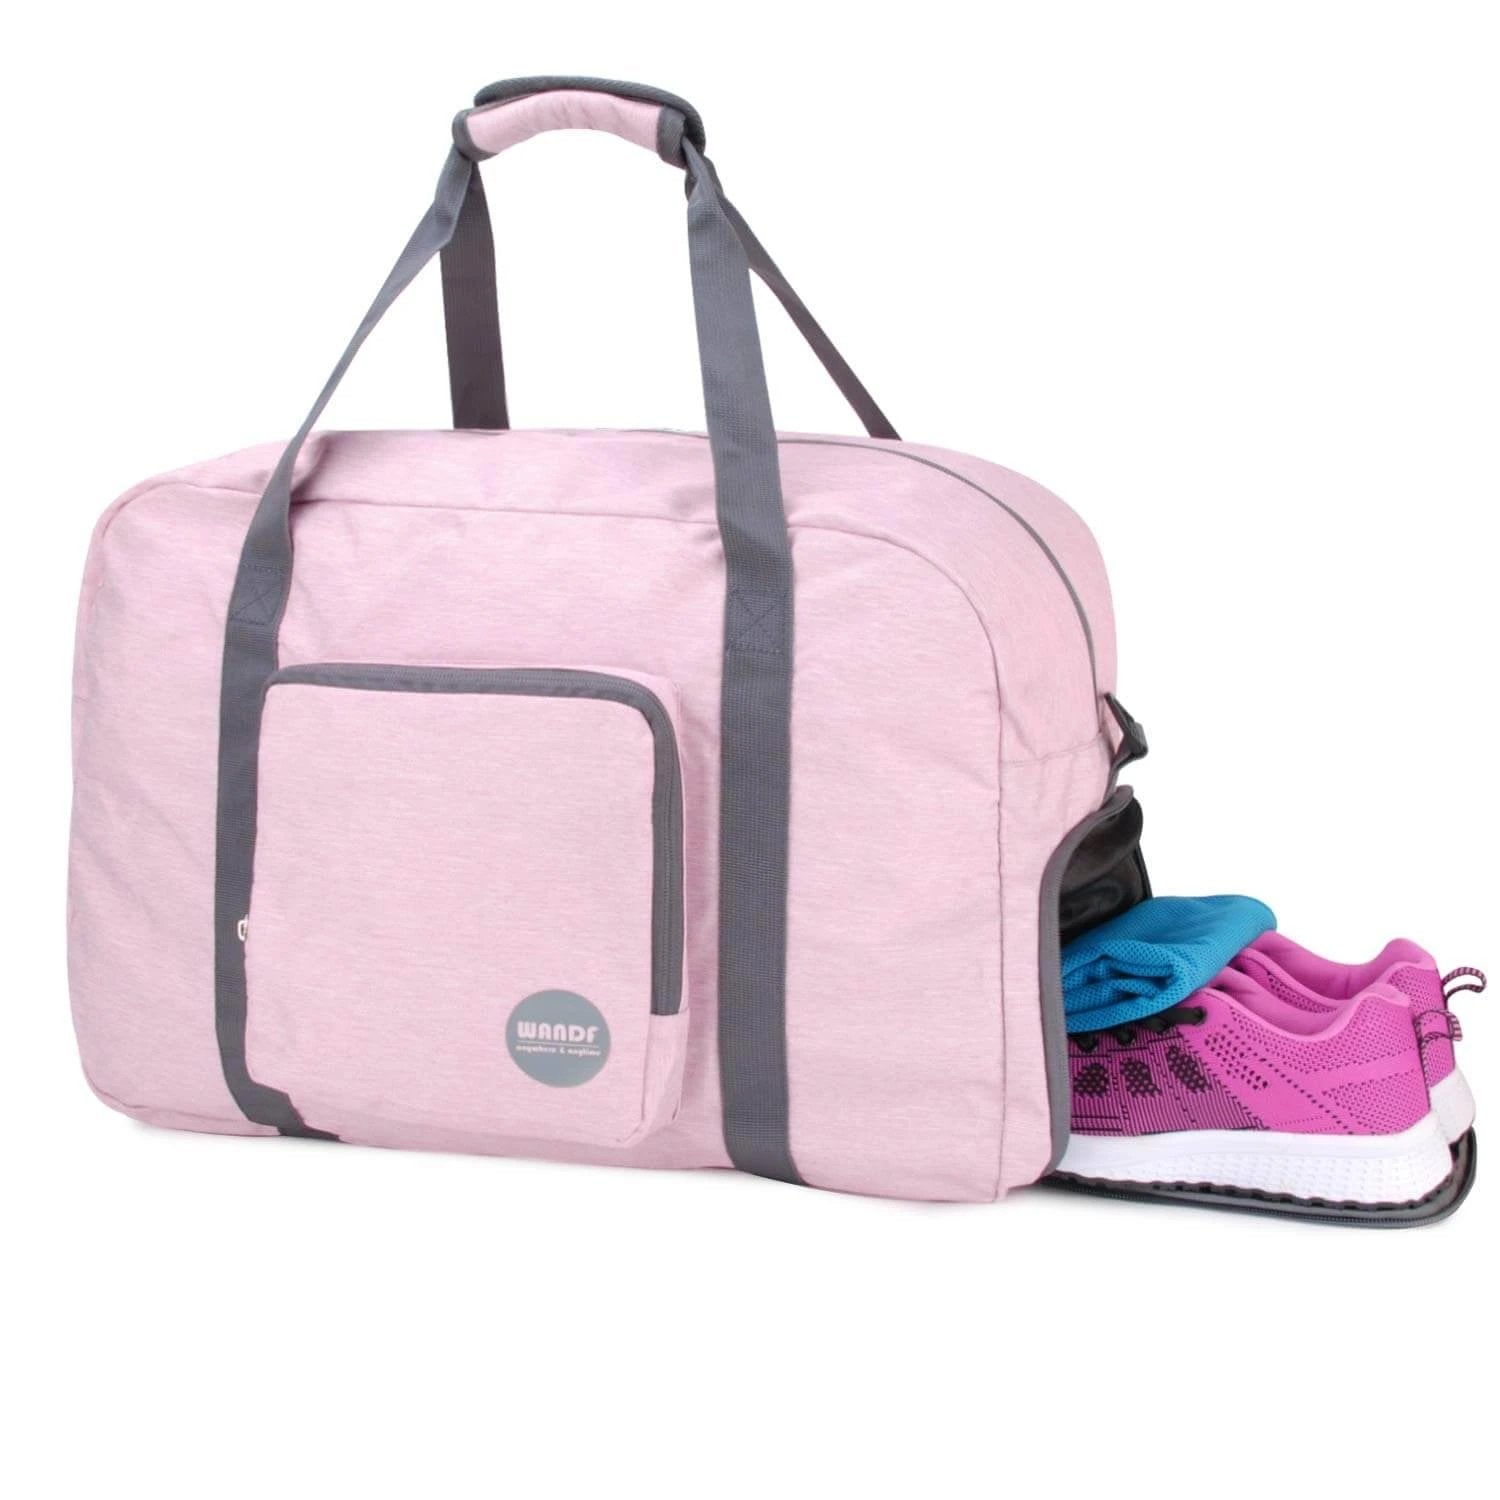 WANDF 303 Duffle Bag 20 inthes with Shoe Compartment